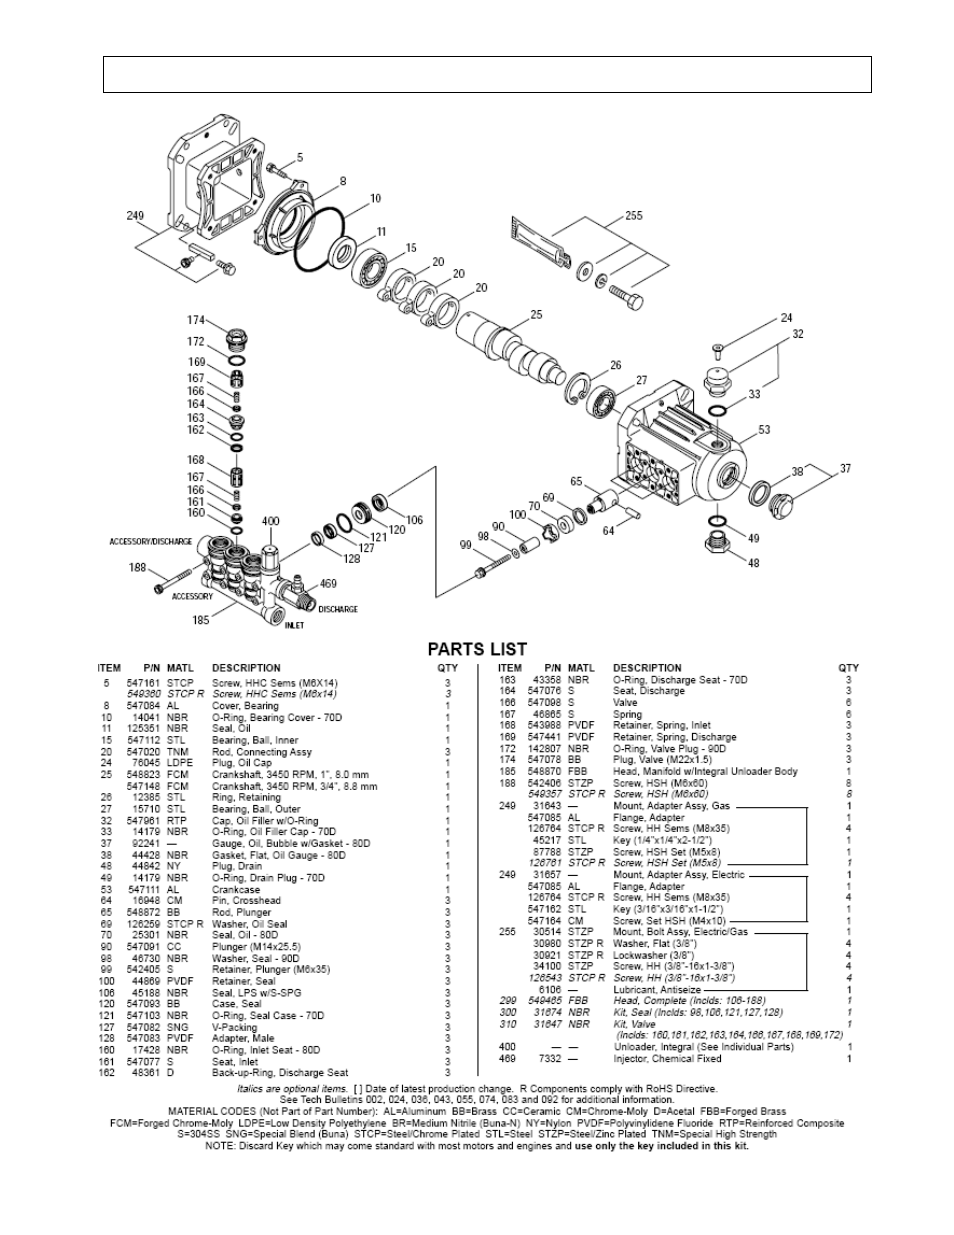 Cat 3spx pump breakdown | Northern Industrial Tools M1578112A User Manual | Page 31 / 40